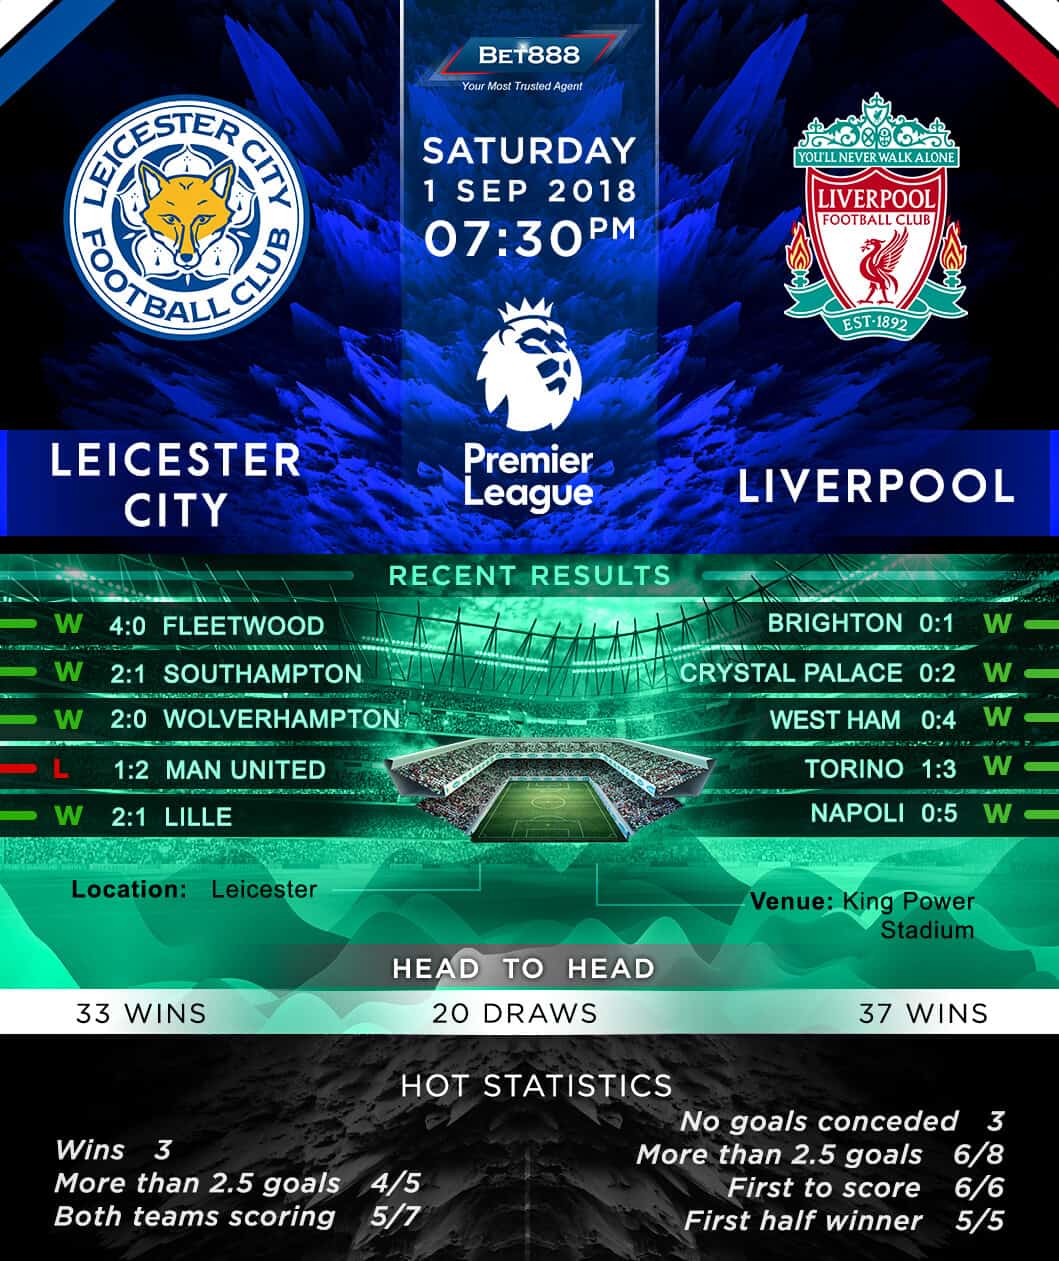 Leicester City vs Liverpool 01/09/18